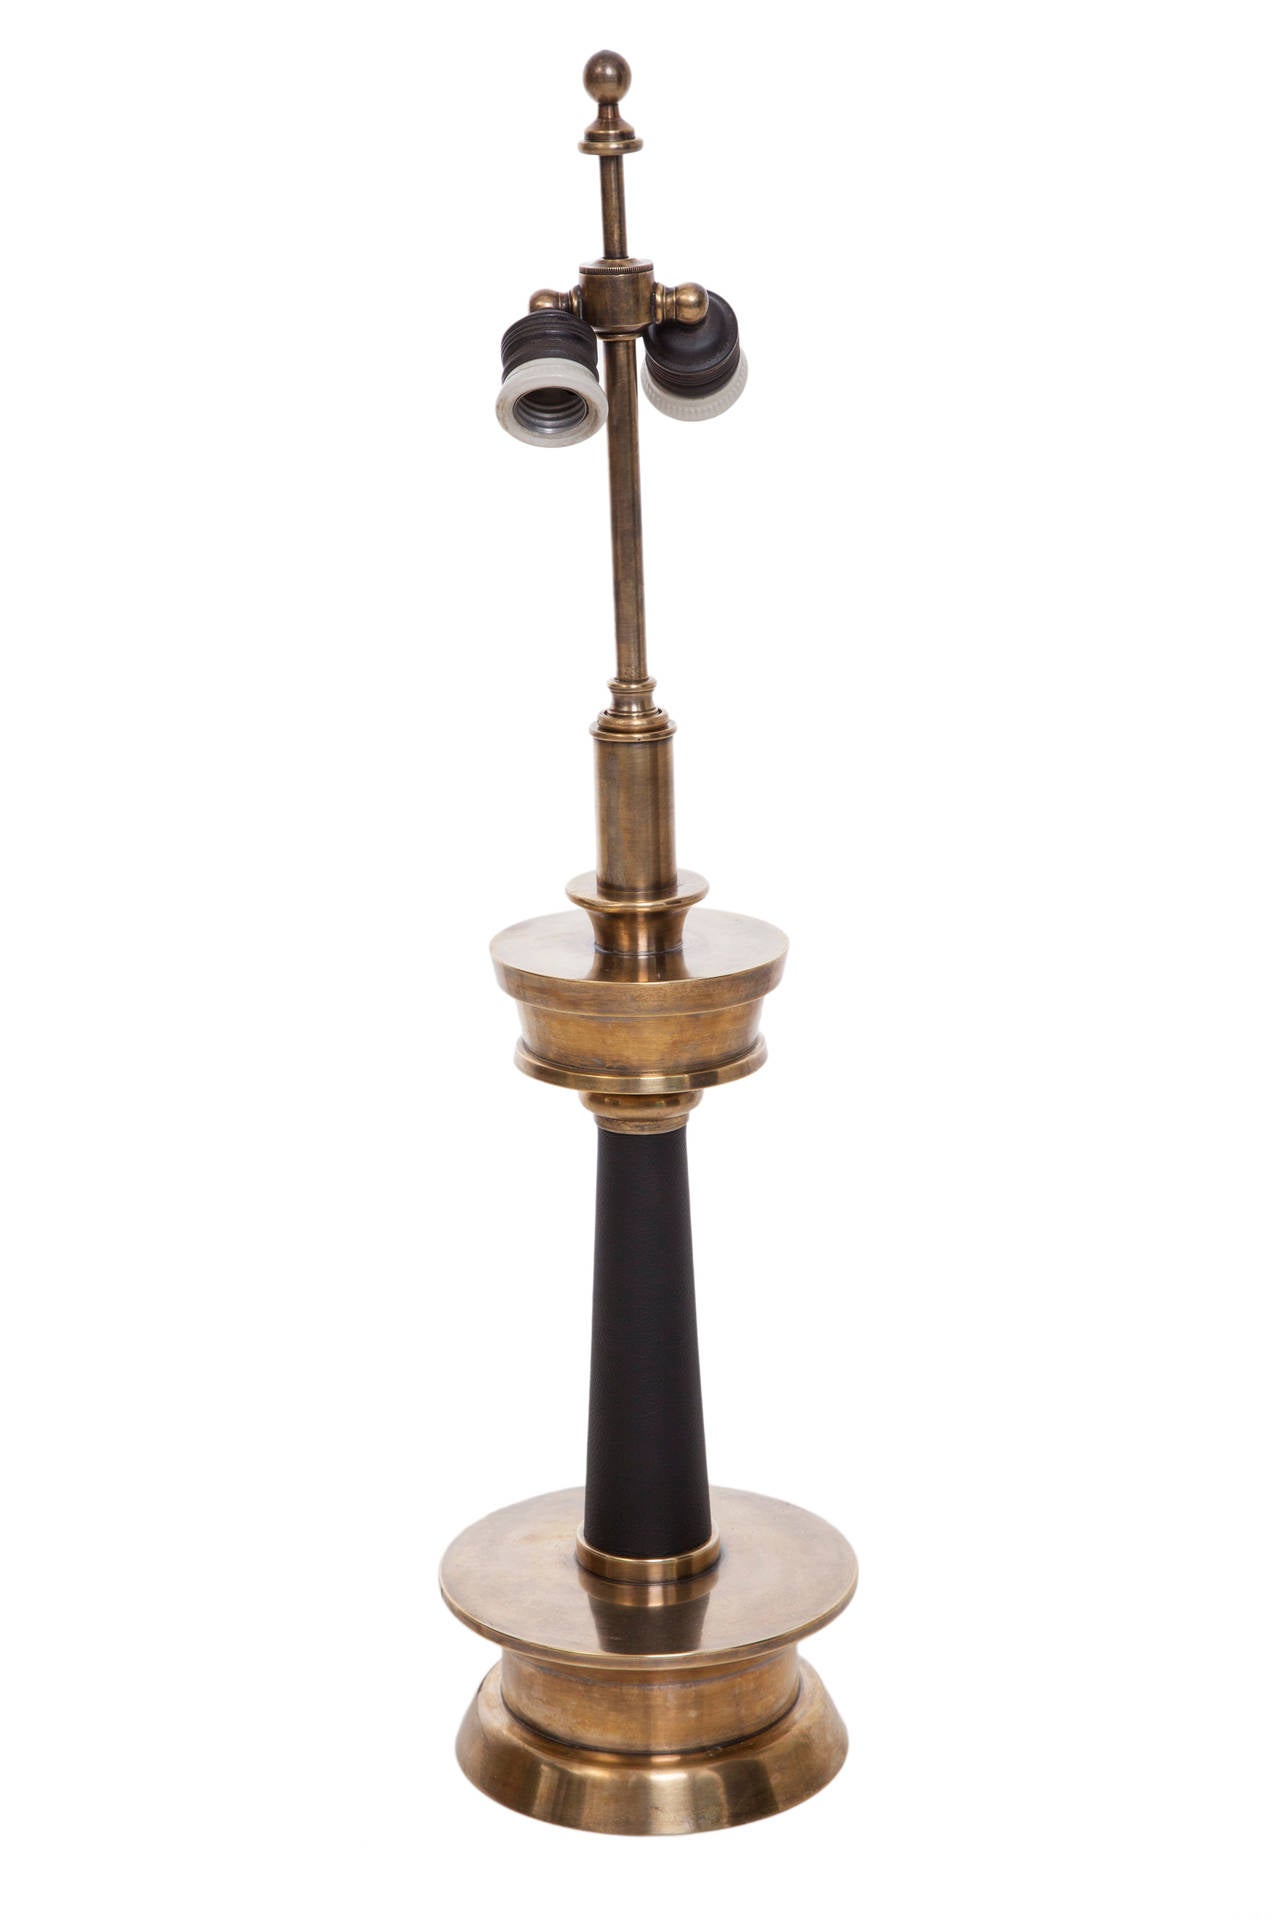 A pair of vintage, circa 1940s candlestick table lamps, with adjustable, double-cluster sockets, above a tapered, leather wrapped stem, with circular shoulder and base in brass. Wiring and sockets to US standard, each lamp requires two Edison base